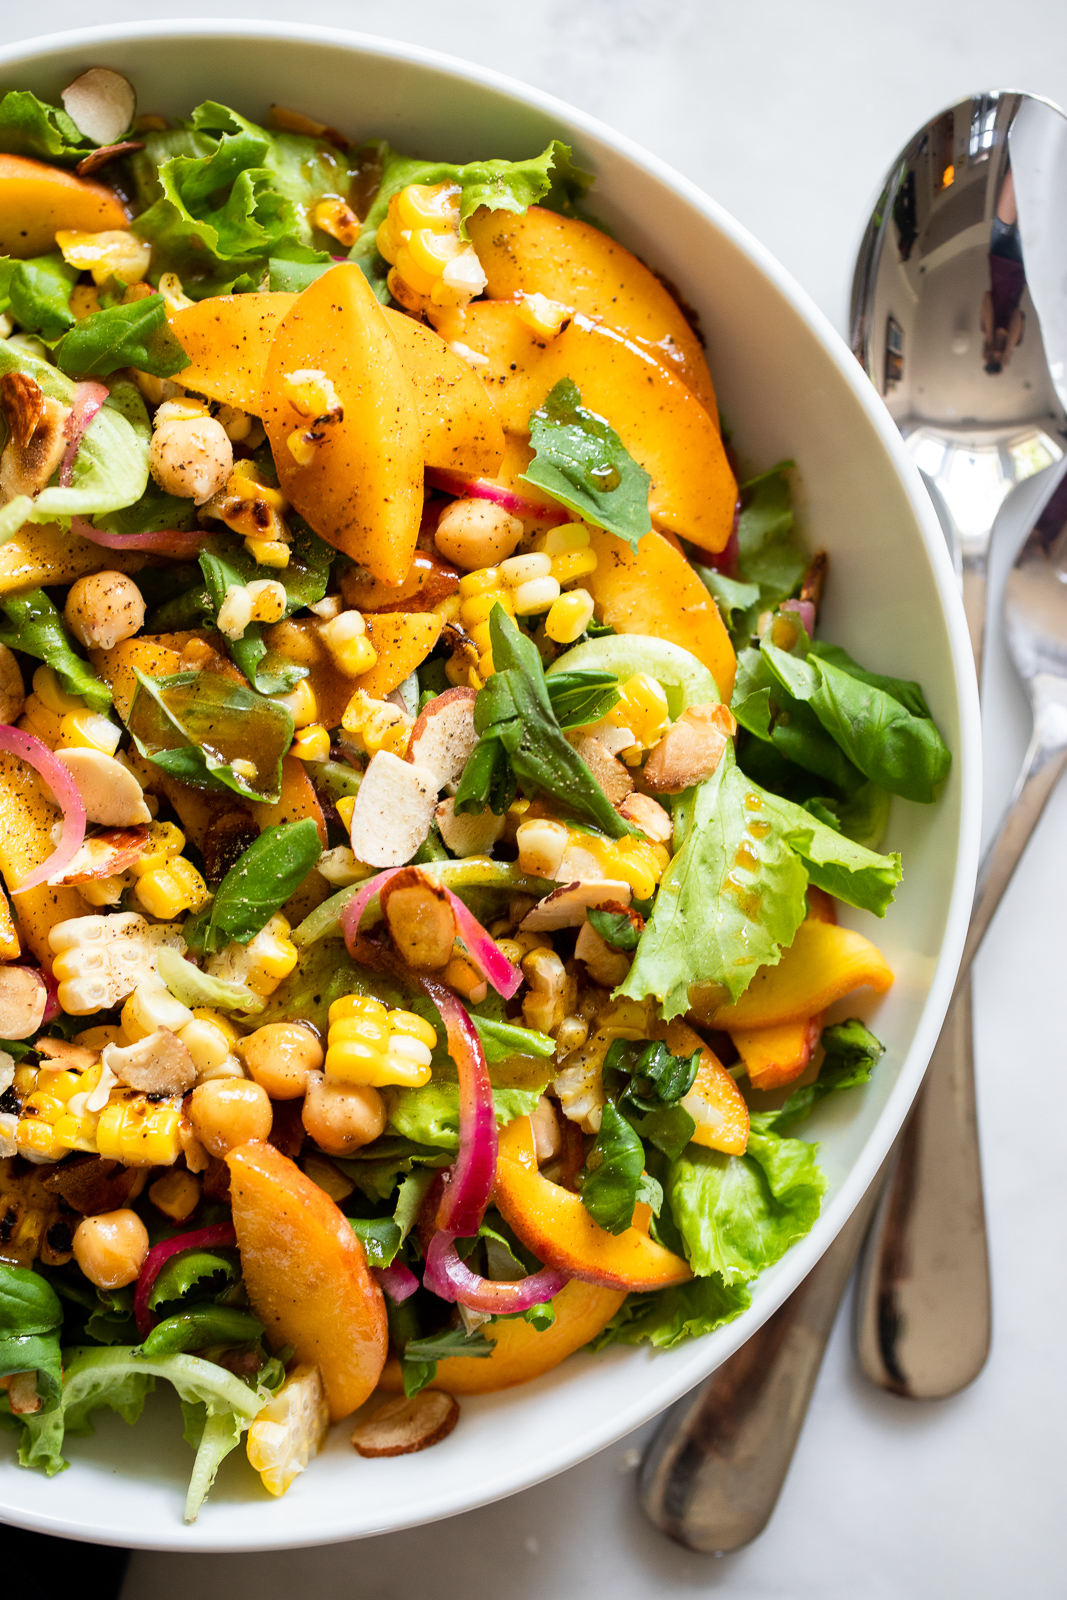 Summer Peach Salad with Corn, Almonds, and Chickpeas